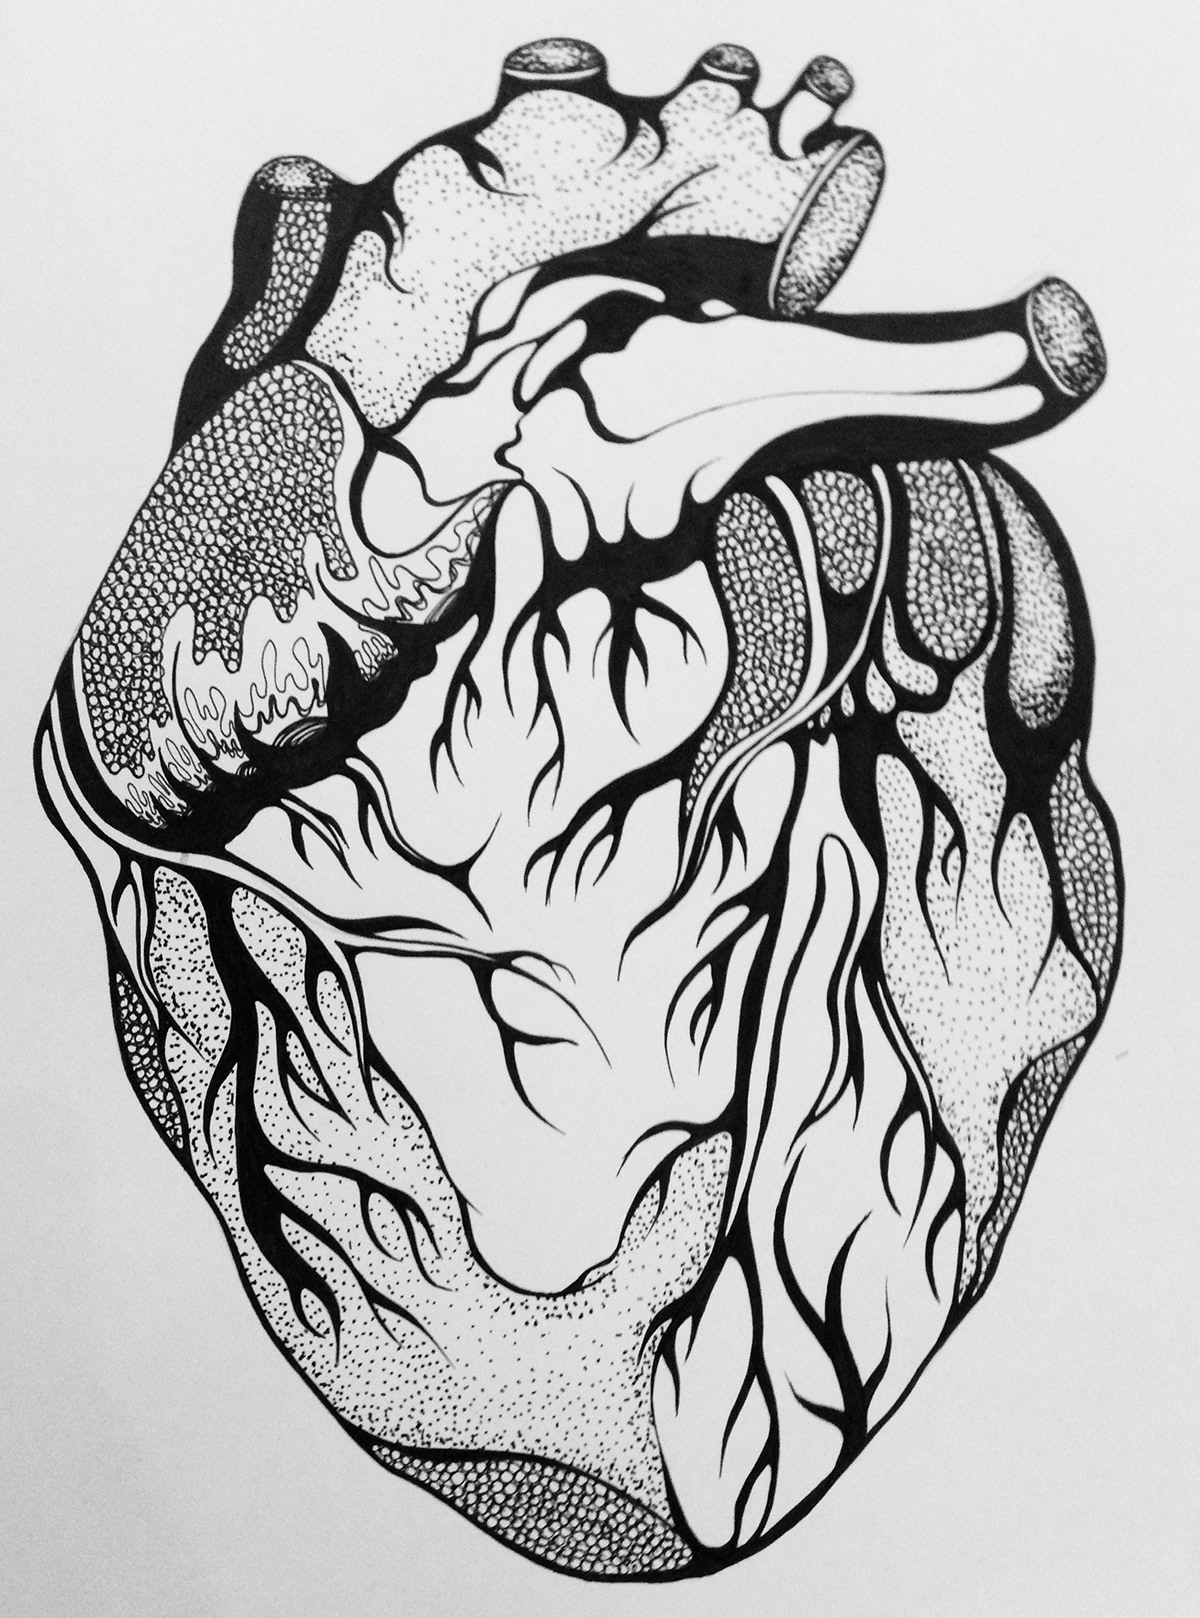 anatomy Pointillism dots details heart human veins black and white vintage fast forward fast motion video pattern structure human anatomy